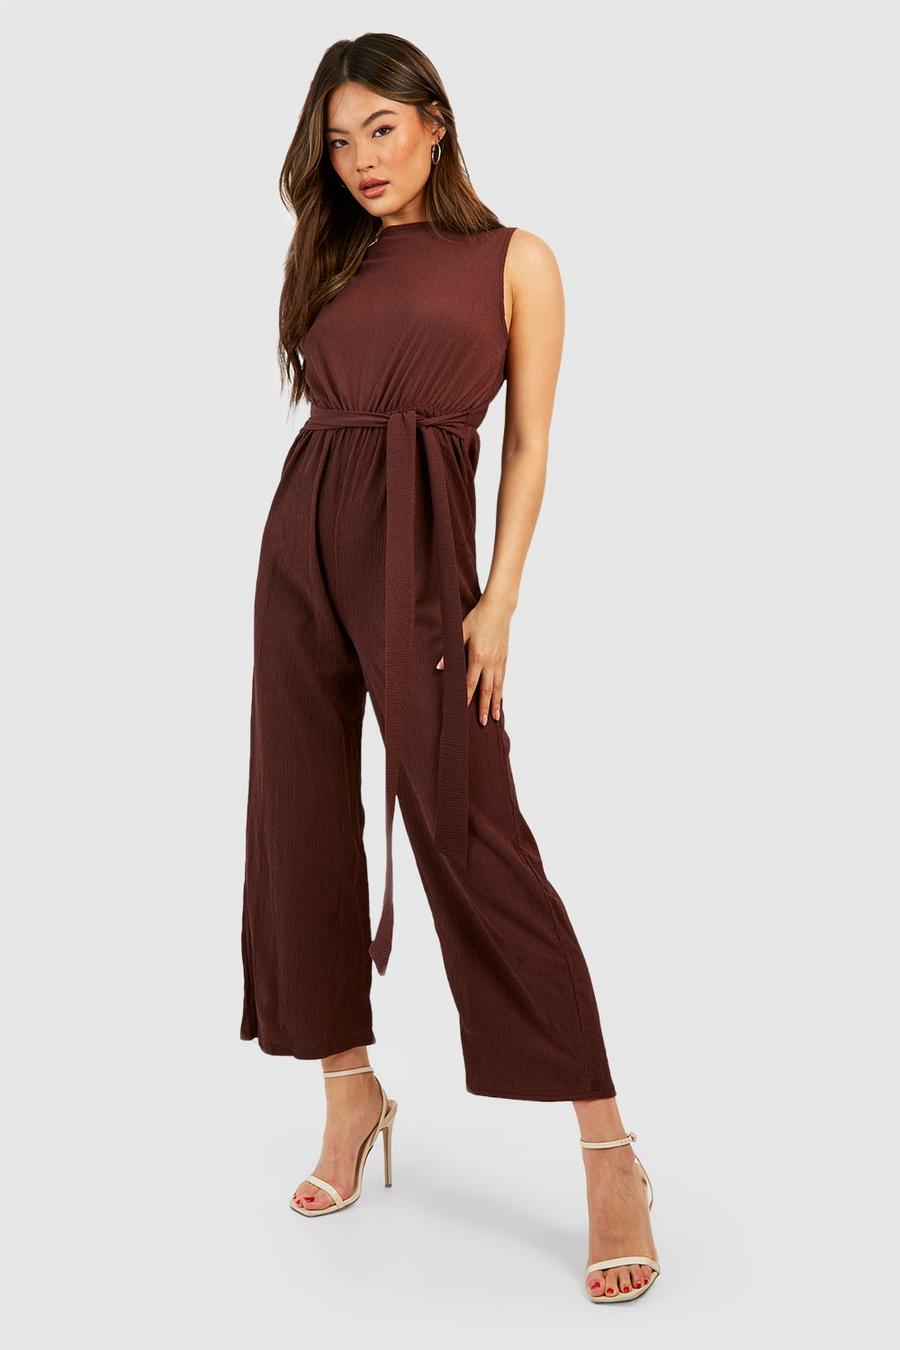 Chocolate brown Culotte Belted Textured Jumpsuit